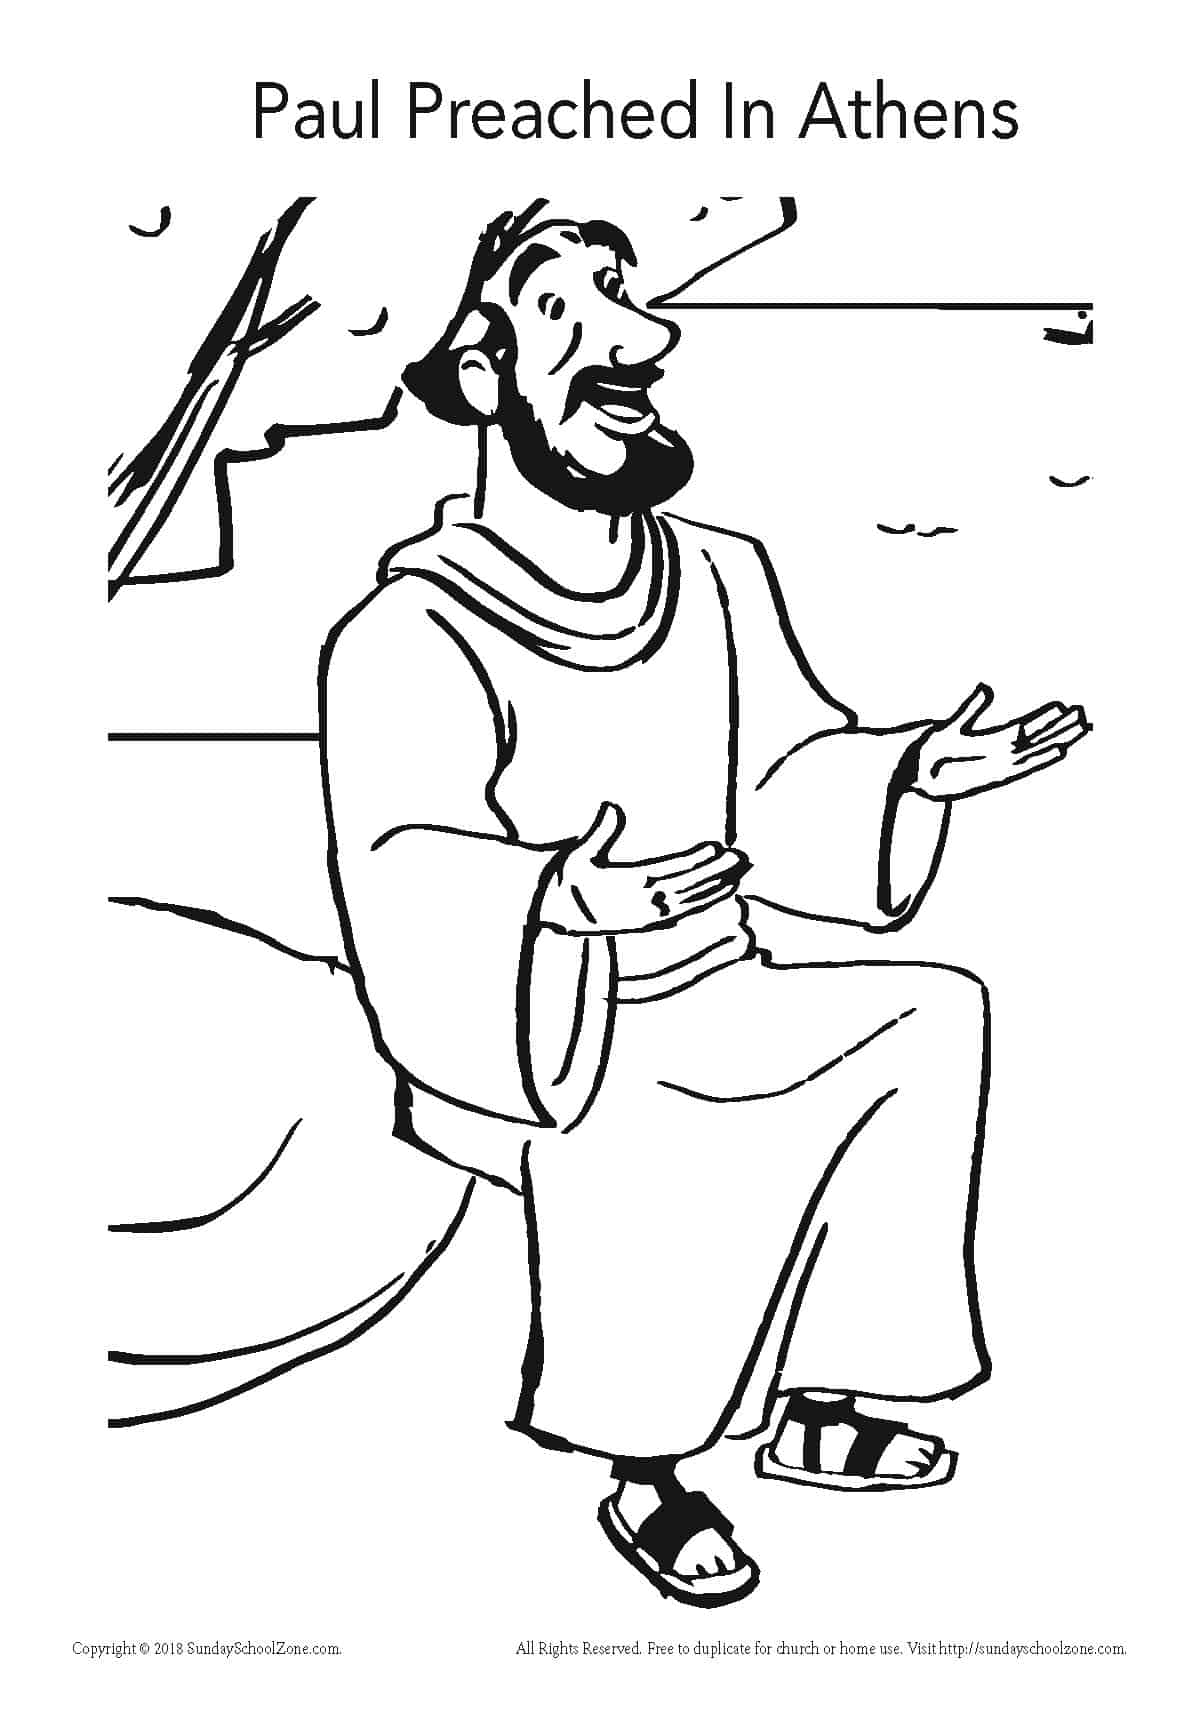 Download Paul Preached In Athens Coloring Page on Sunday School Zone